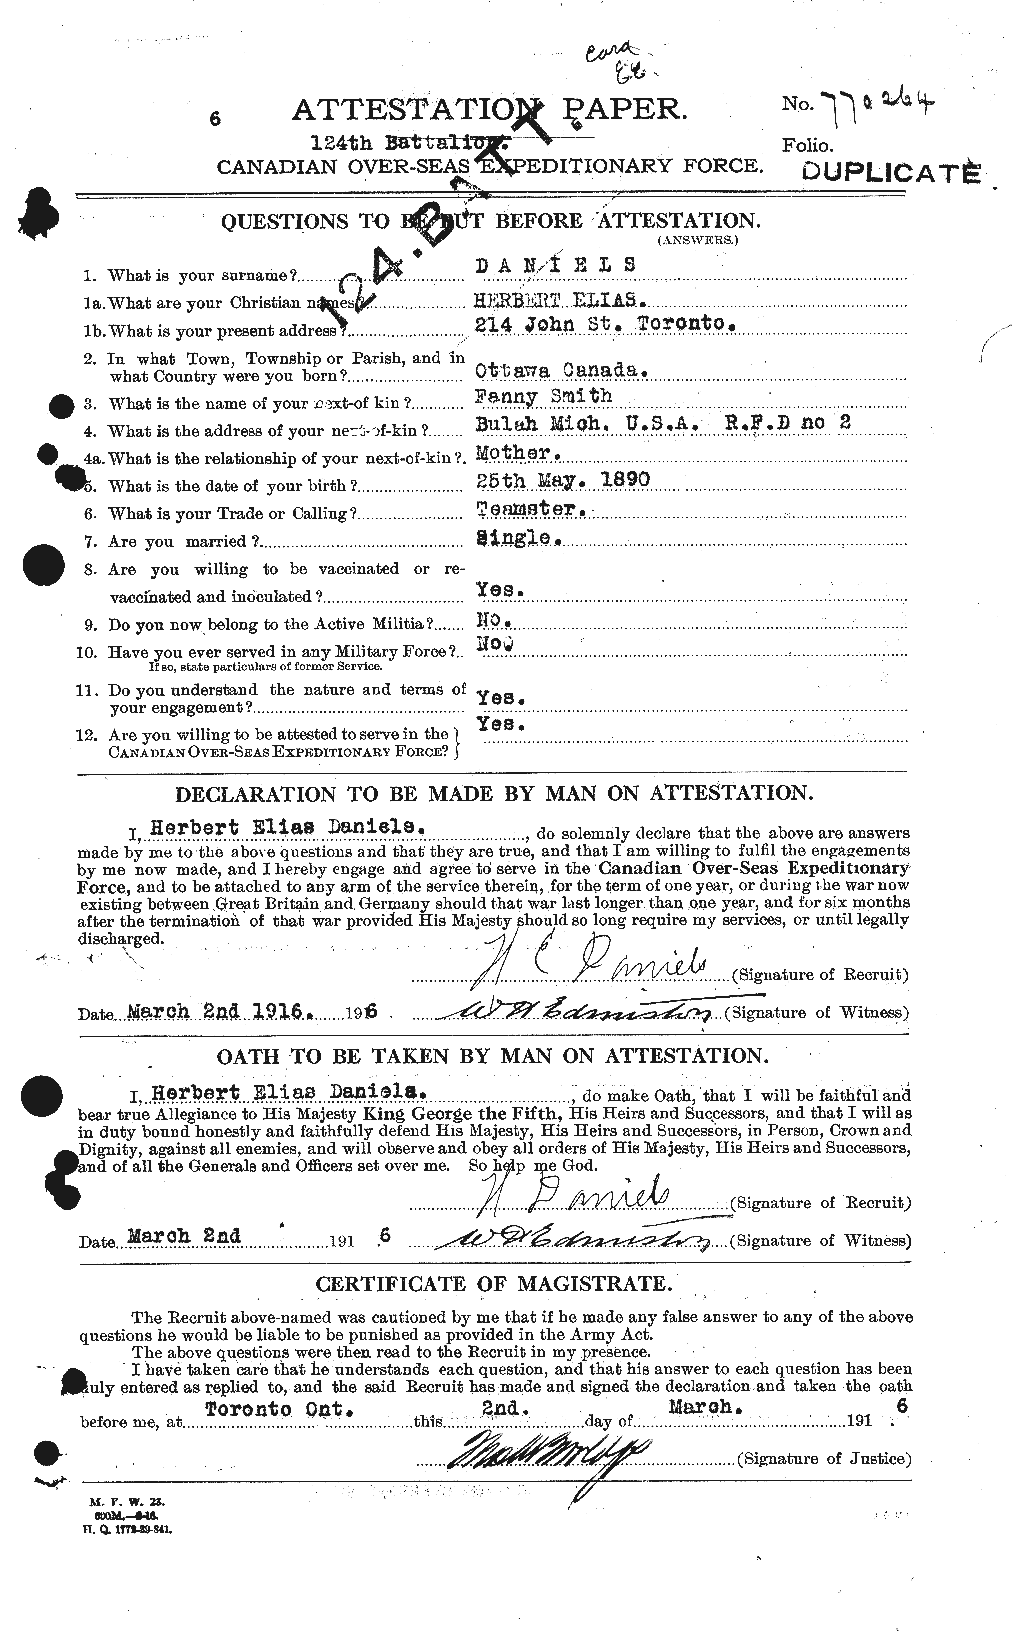 Personnel Records of the First World War - CEF 279620a